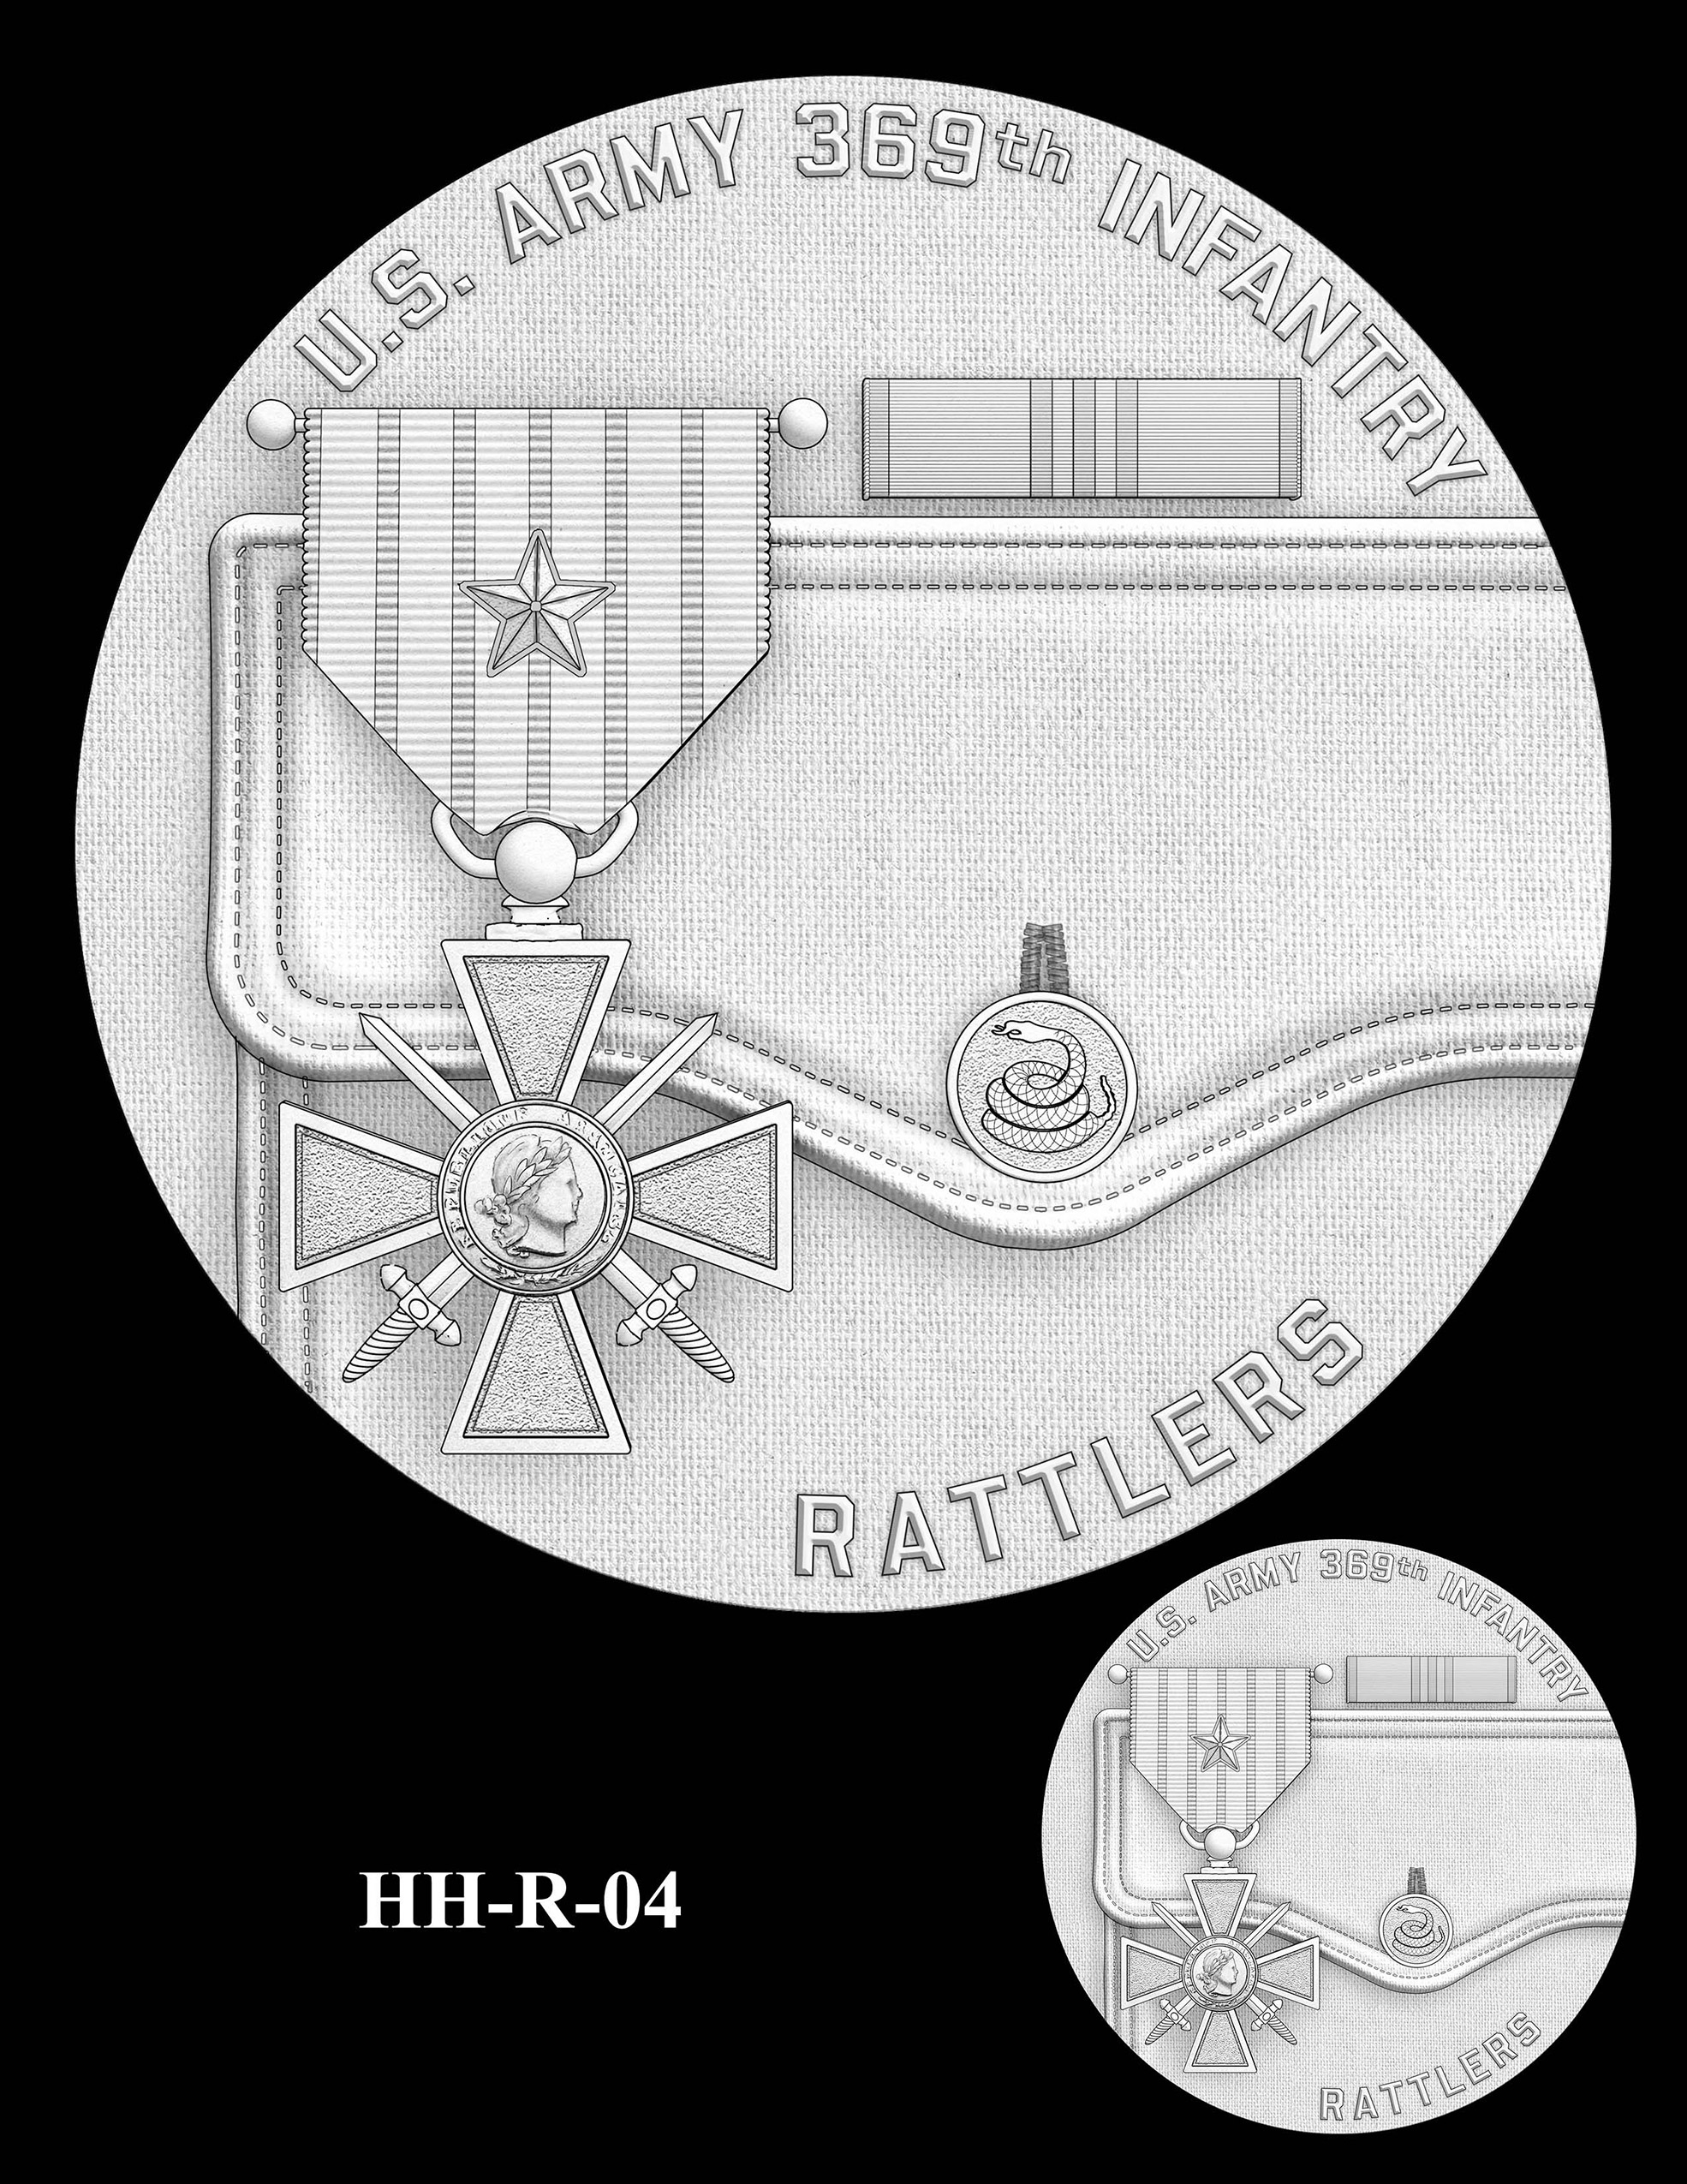 HH-R-04 -- Harlem Hellfighters Congressional Gold Medal